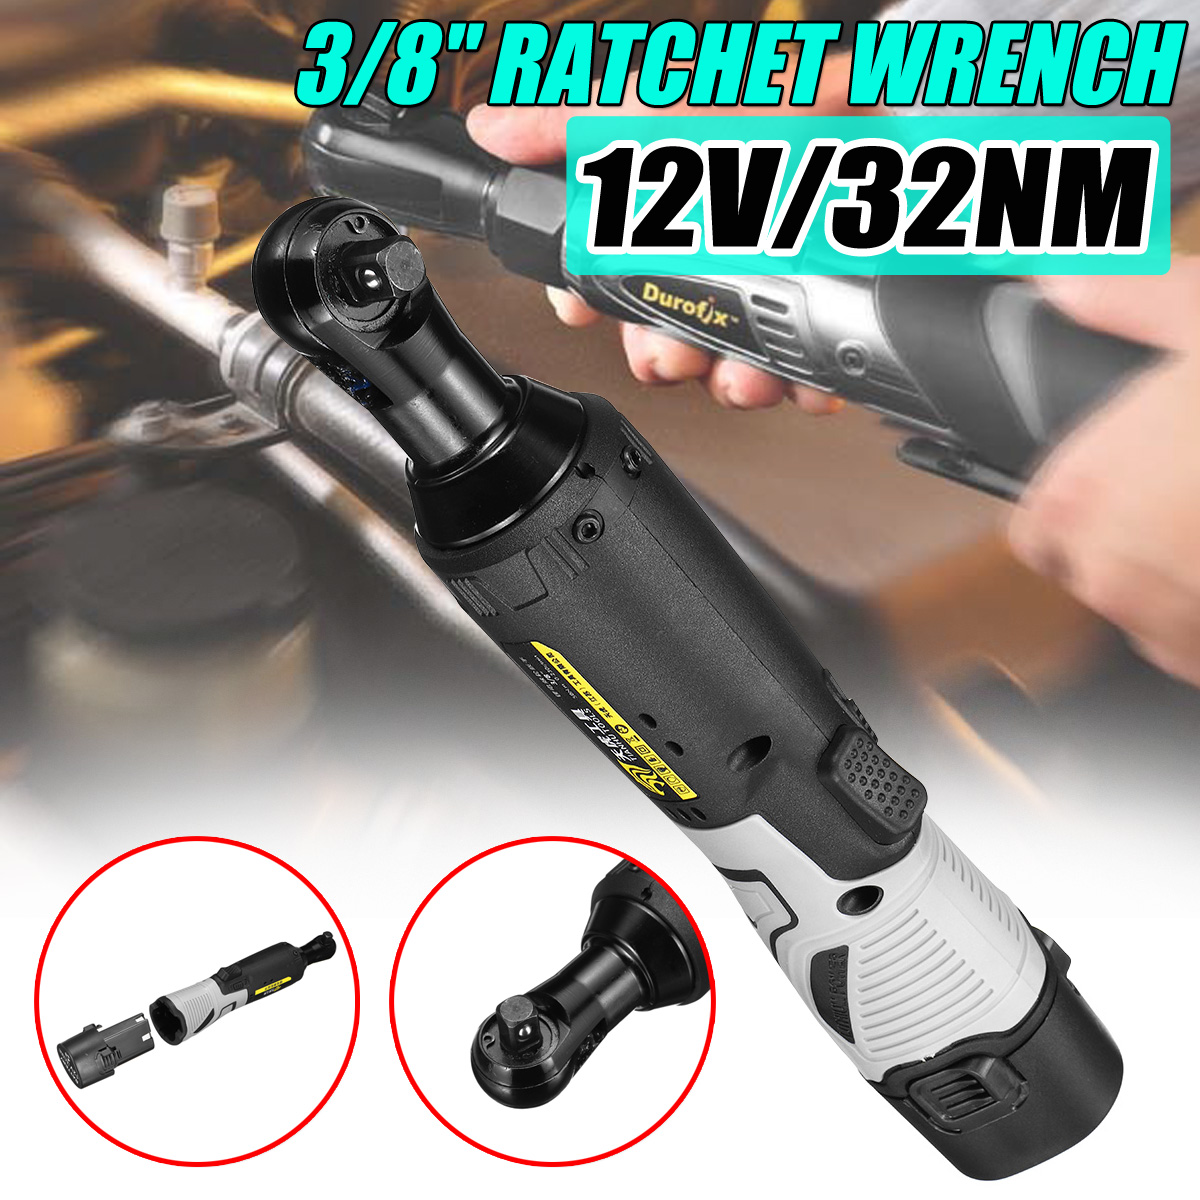 12V-38quot-Cordless-Electric-Ratchet-Wrench-Tool-Set-with-Battery--Charger-Kit-32NM-1300m-1579975-1